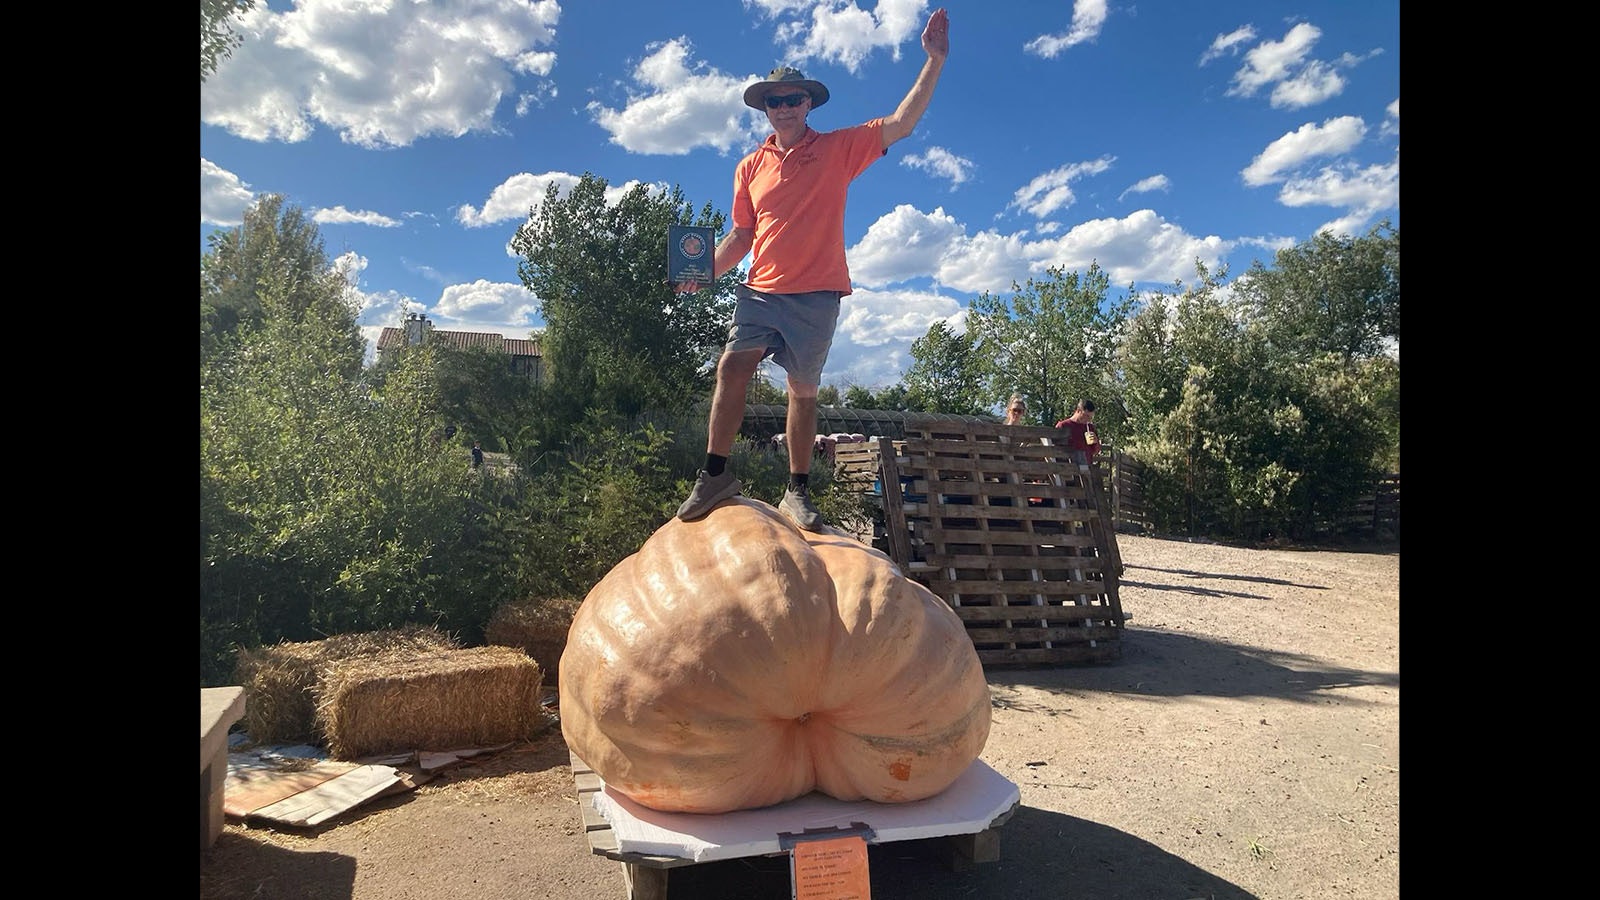 Worland pumpkin king Jay Richard won a Littleton, Colorado, weigh-off over the weekend, coming in at 1,686 pounds.